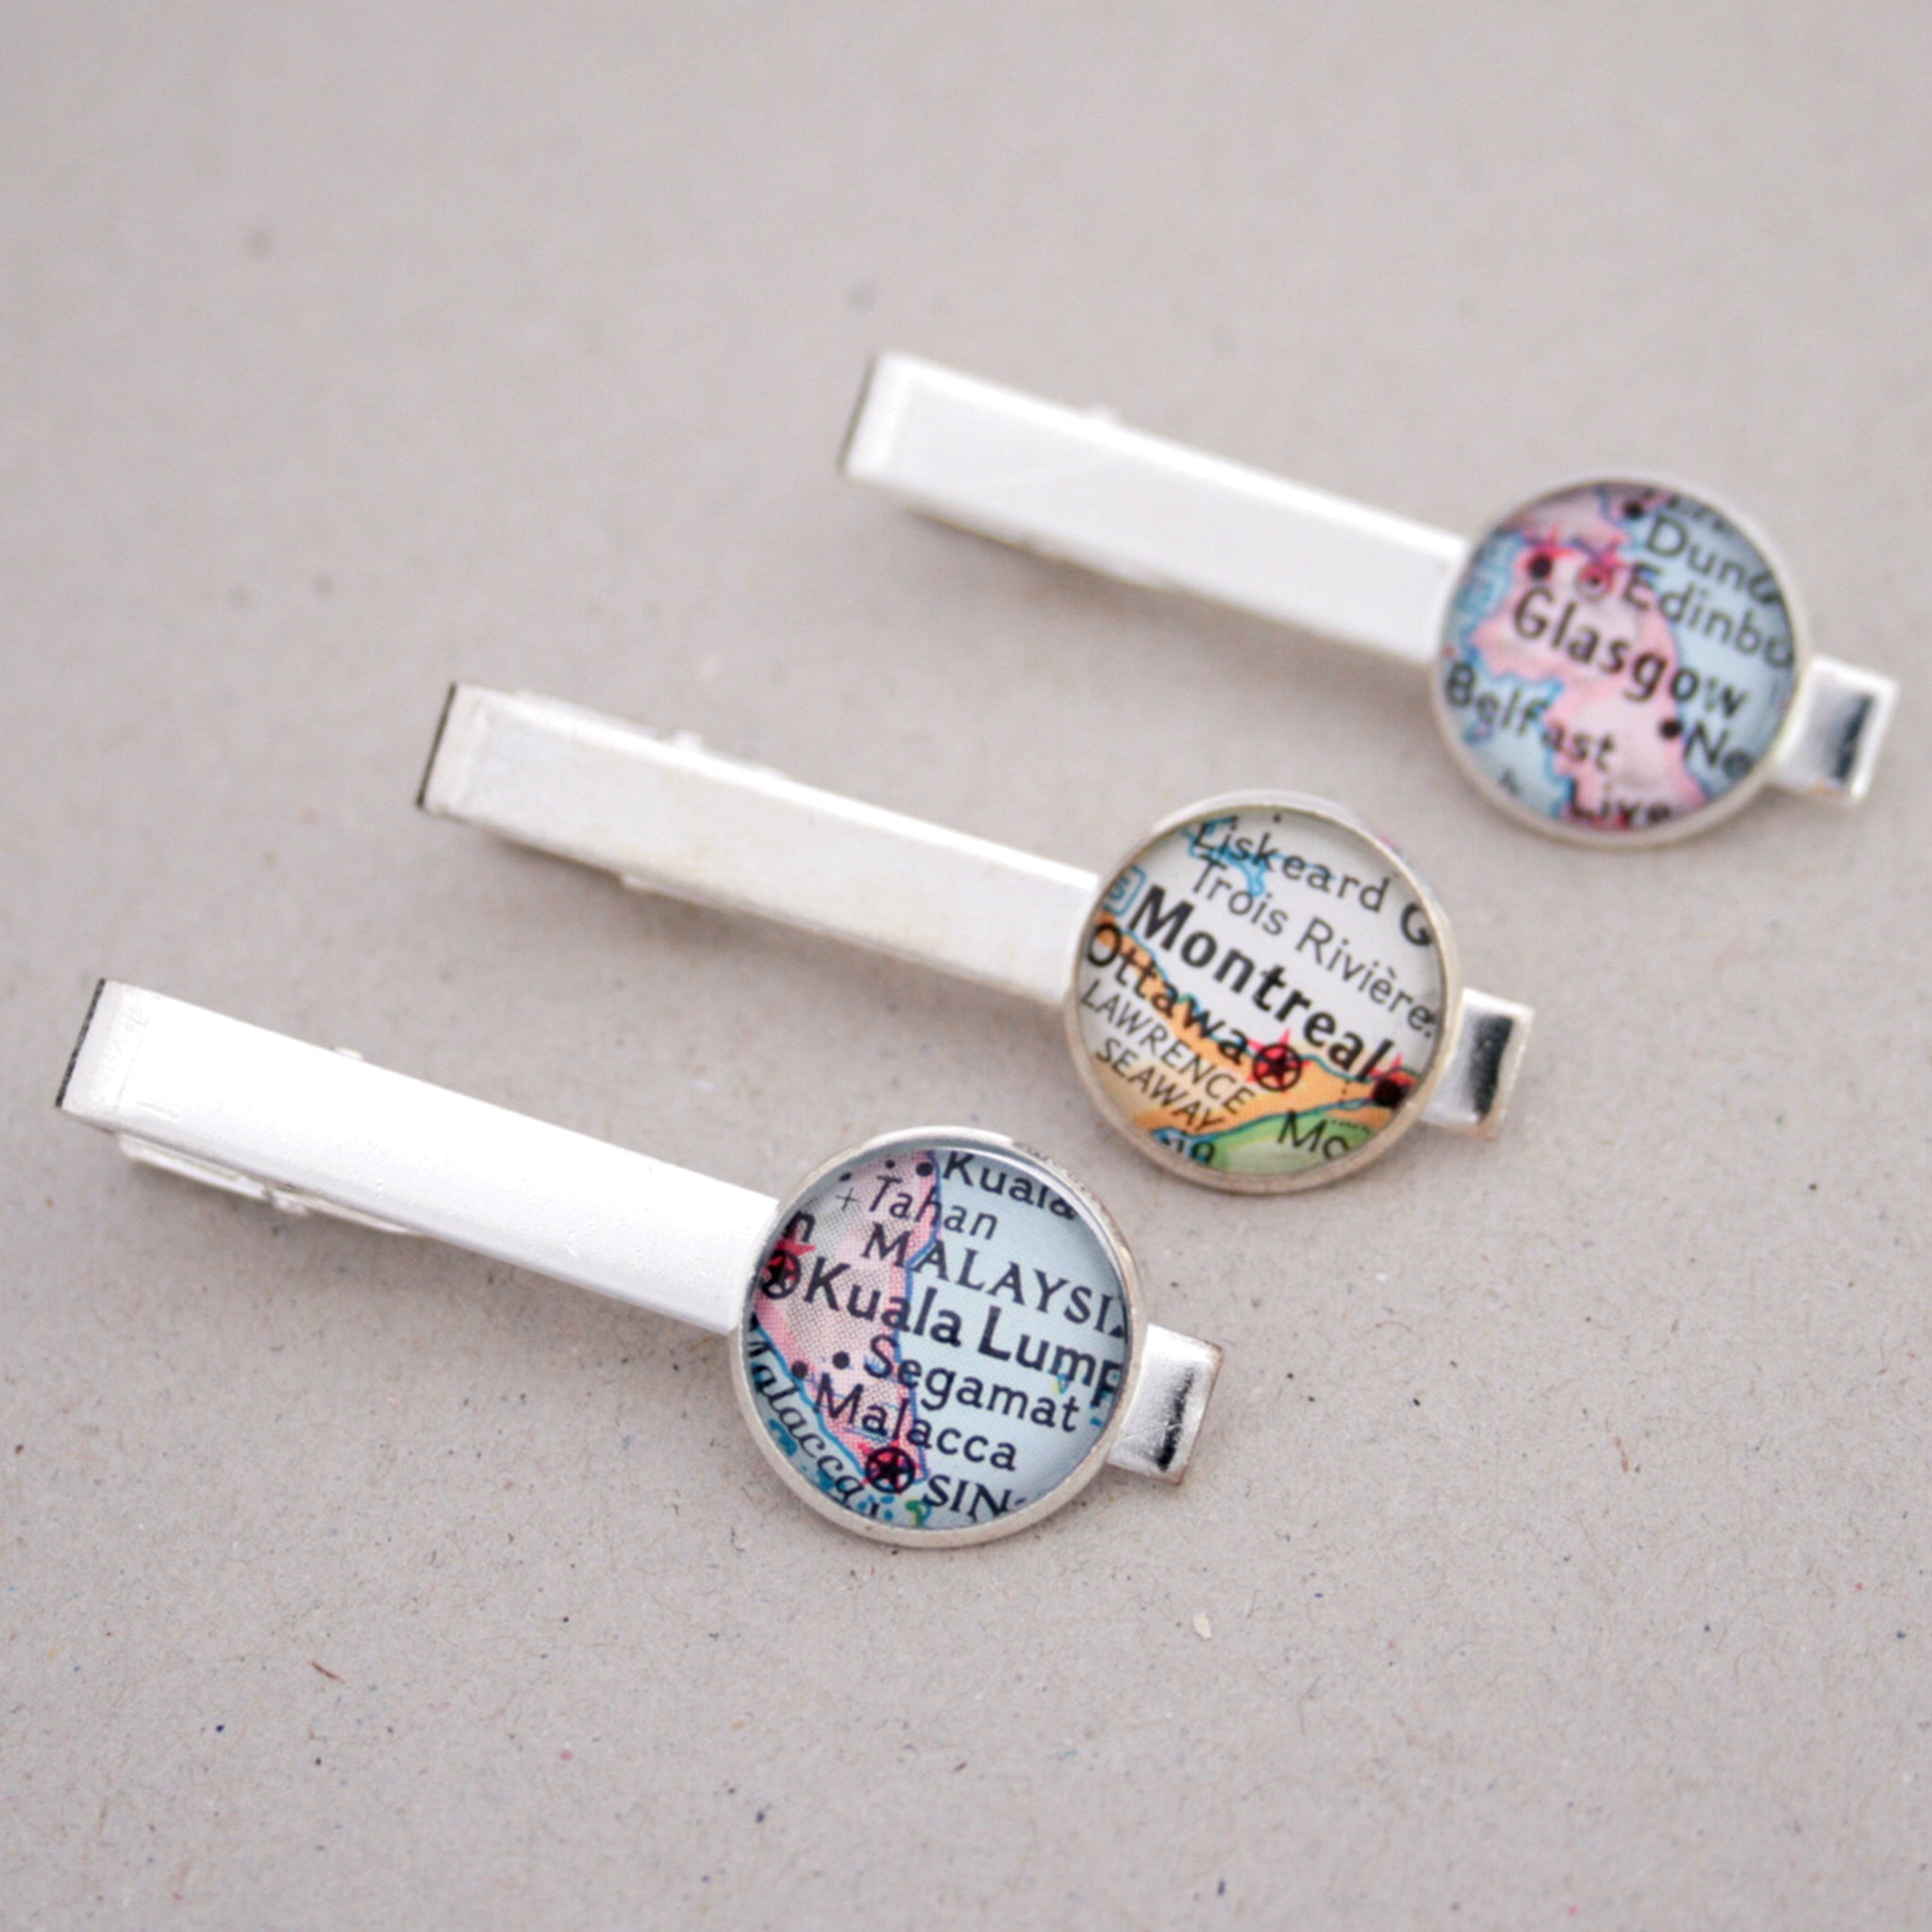 Three personalised tie clips in silver color featuring selection of maps